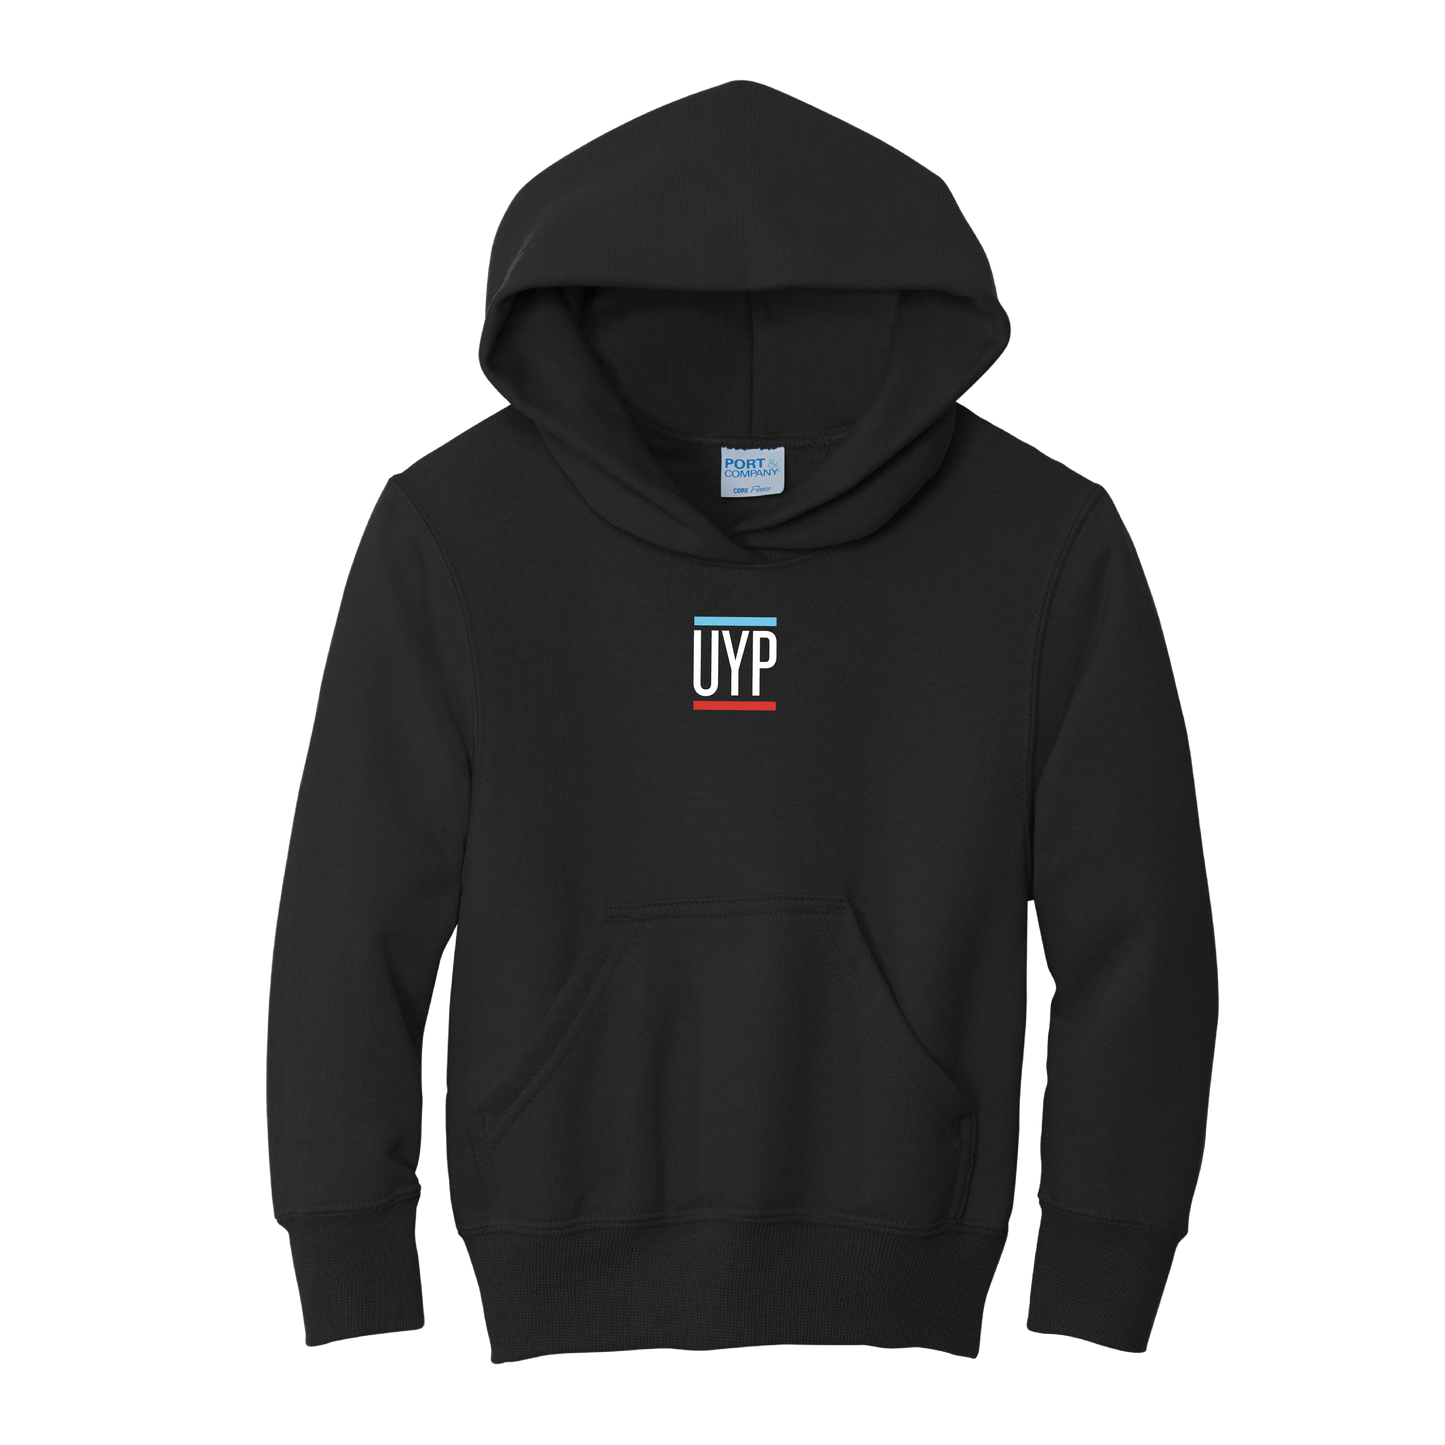 UYP The Park Shapes Hoodie Youth - Black